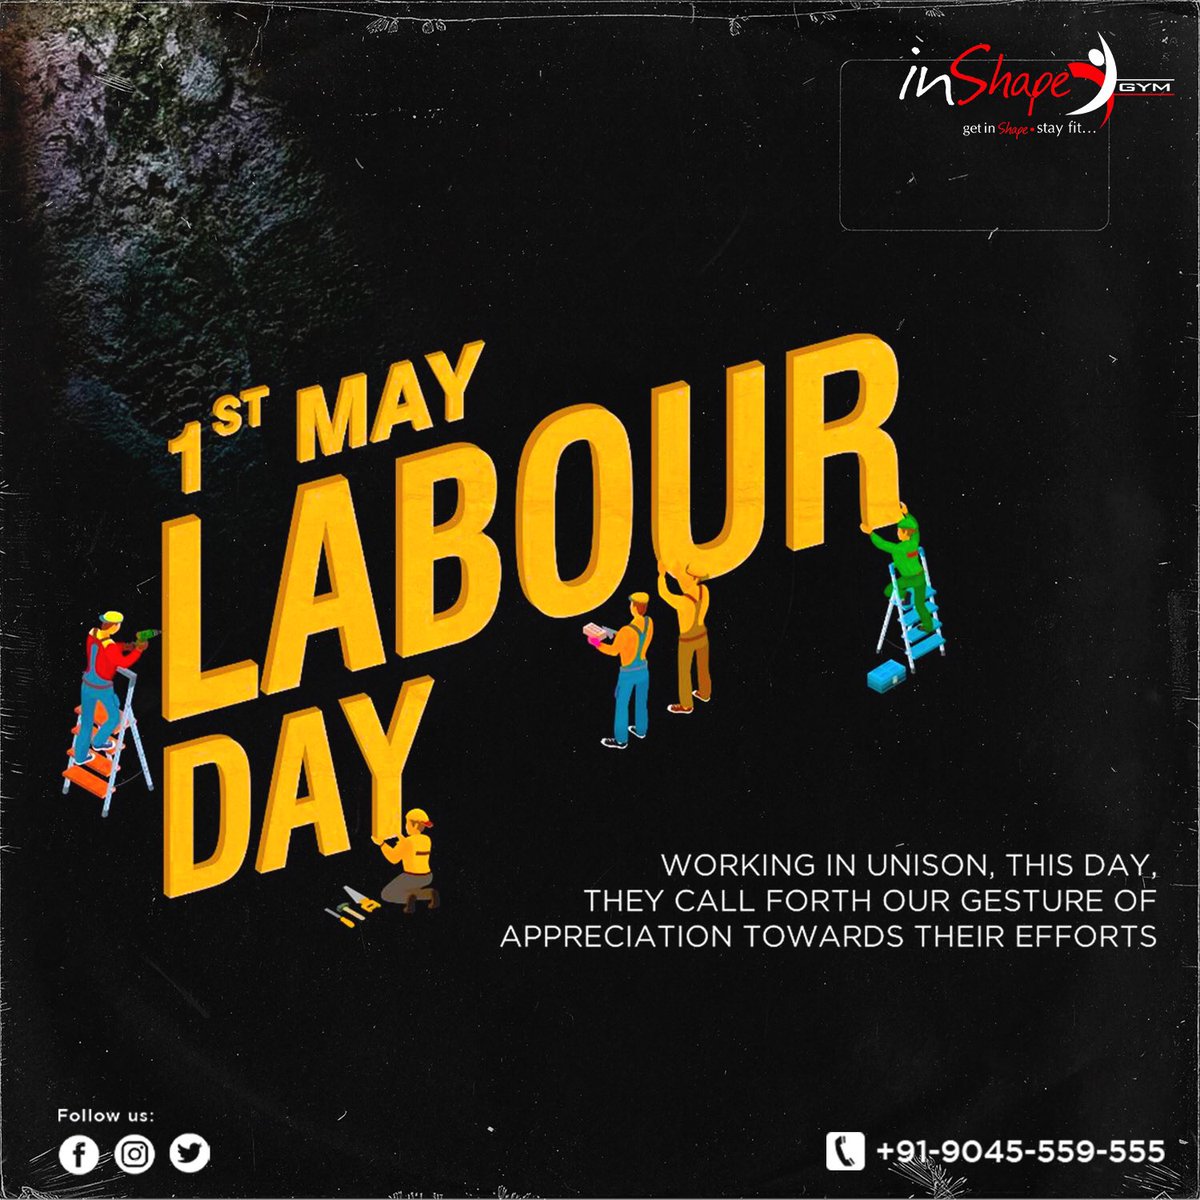 Uniting in celebration of International Labour Day, recognizing the global workforce's invaluable contributions to society.
.
.
#InshapeGym #LabourDay #WorkersDay #MayDay
#InternationalWorkersDay
#LabourRights
#FairWages
#Solidarity
#UnionStrong
#WorkersRights
#LabourMovement